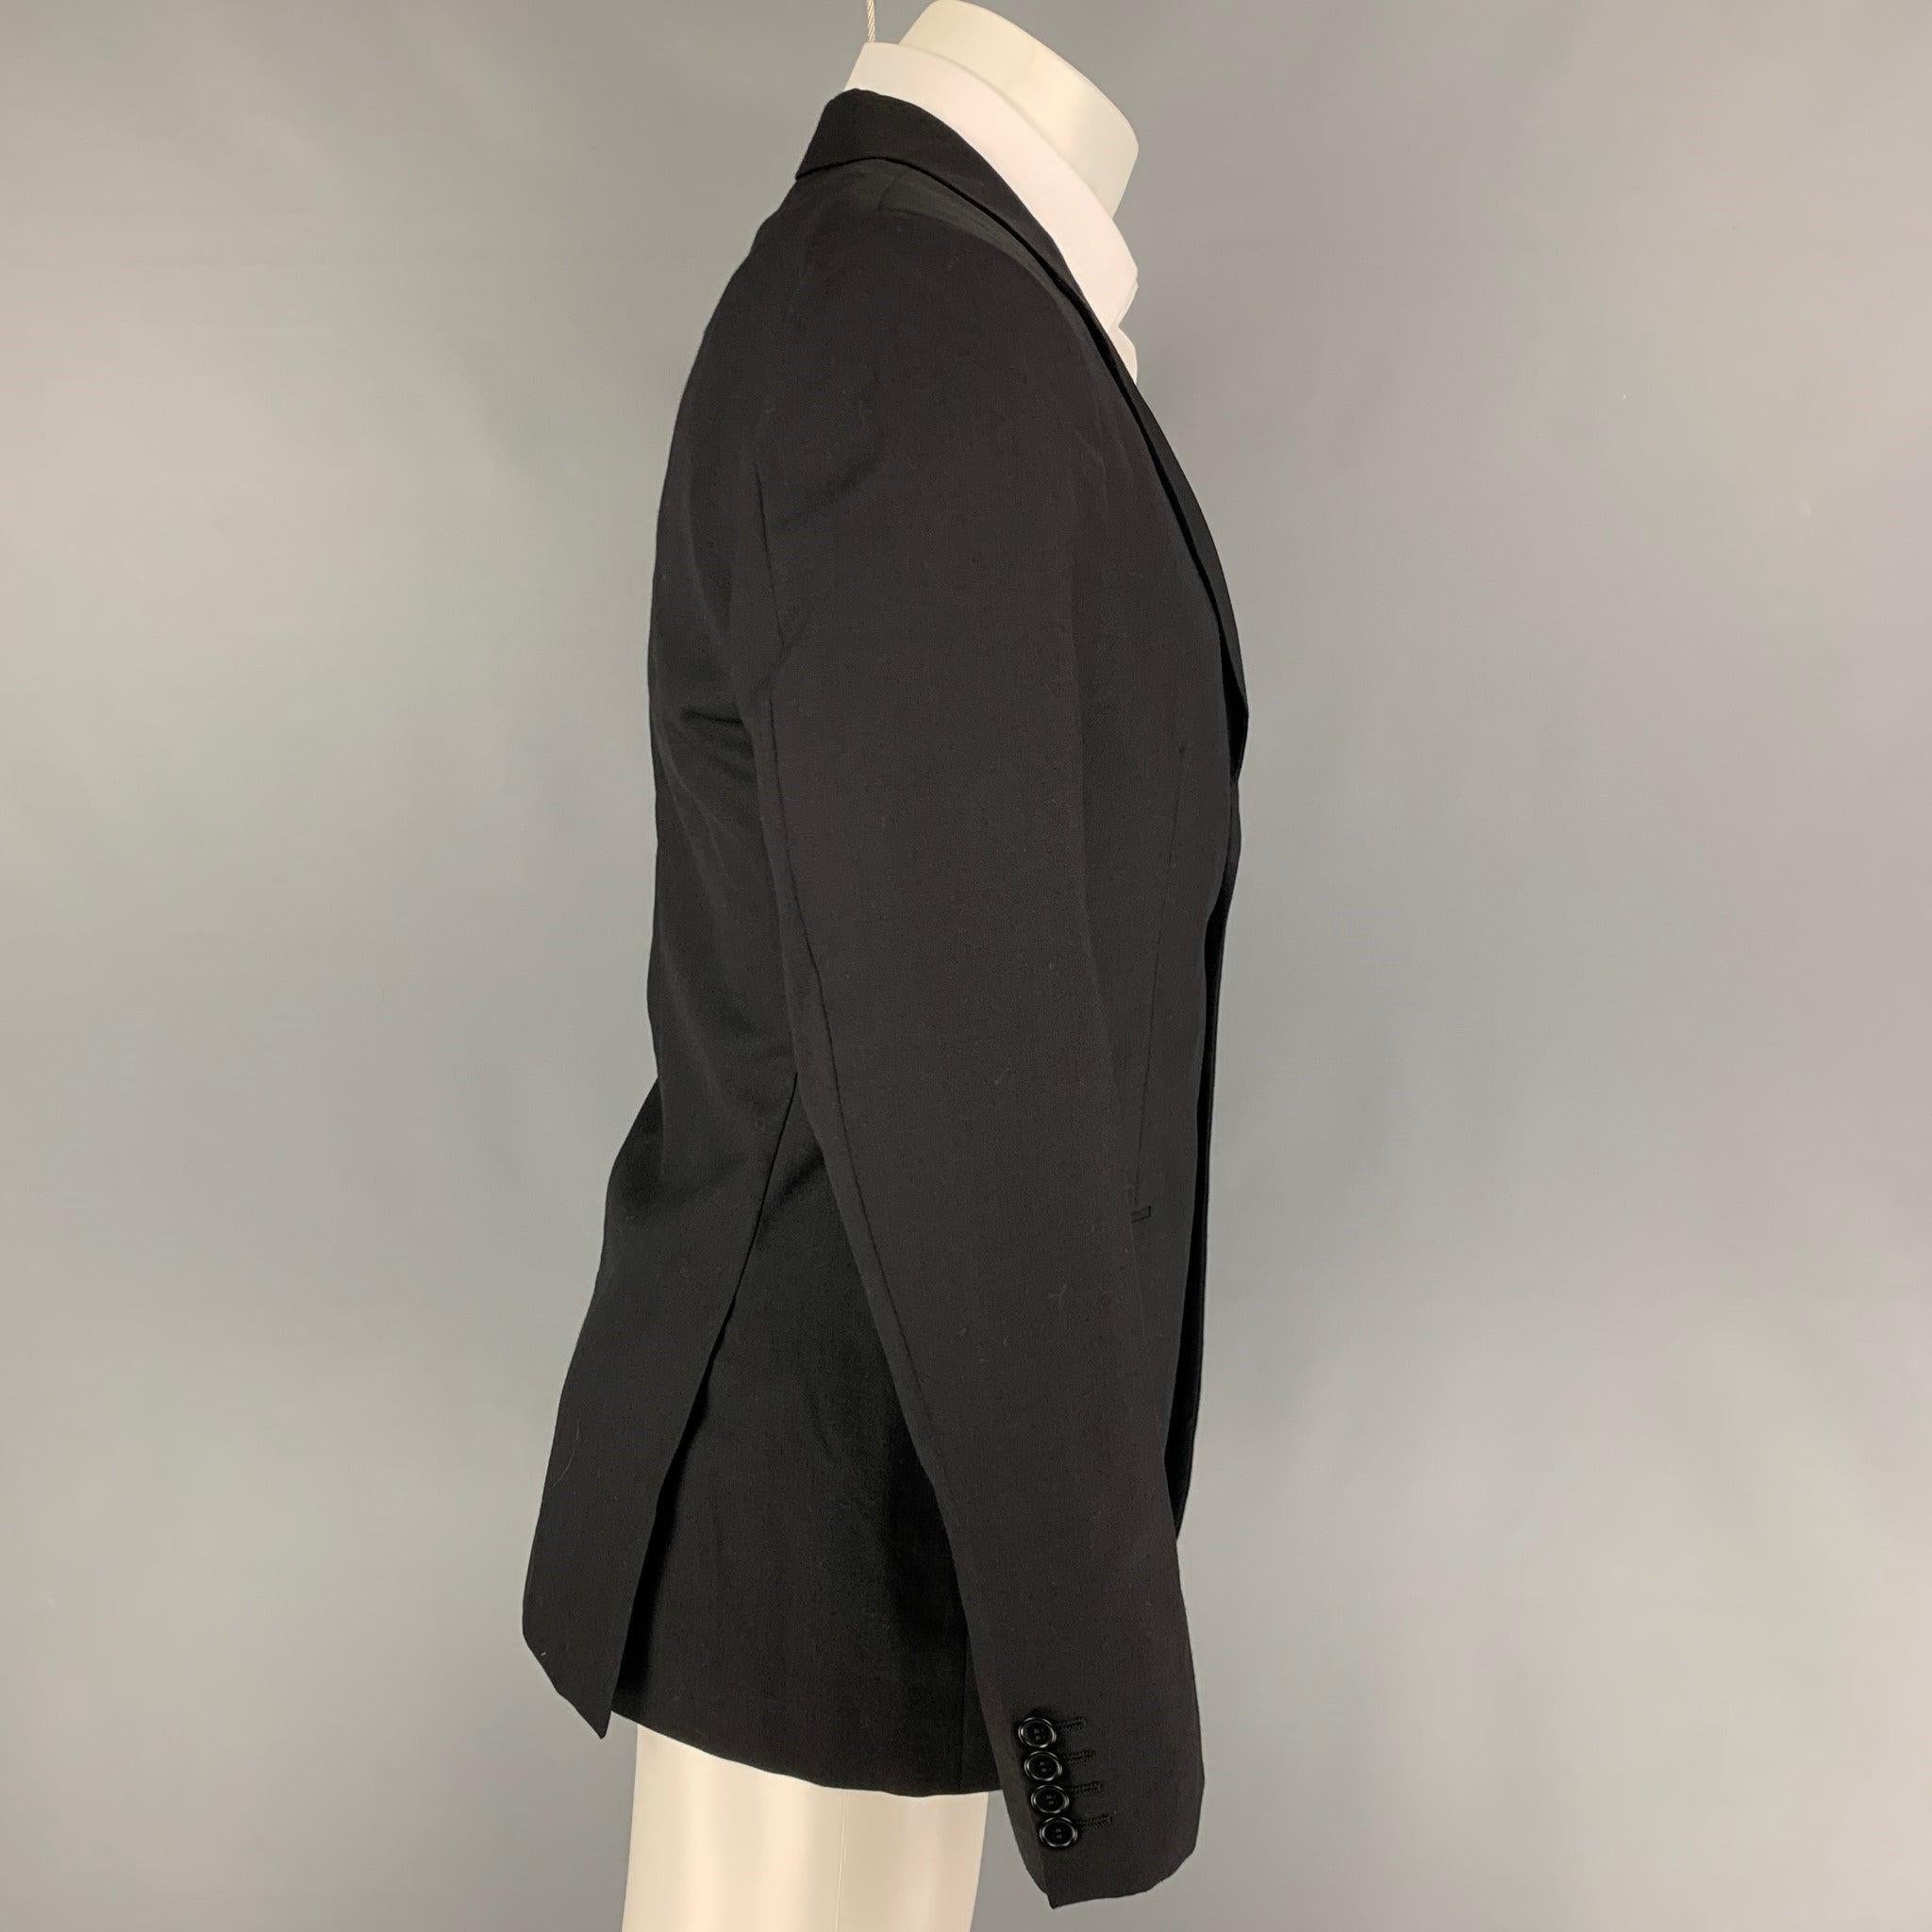 CALVIN KLEIN COLLECTION sport coat comes in a black wool with a full liner featuring a notch lapel, flap pockets, double back vent, and a double button closure.
Very Good
Pre-Owned Condition. 

Marked:   48/38 

Measurements: 
 
Shoulder:
17.5